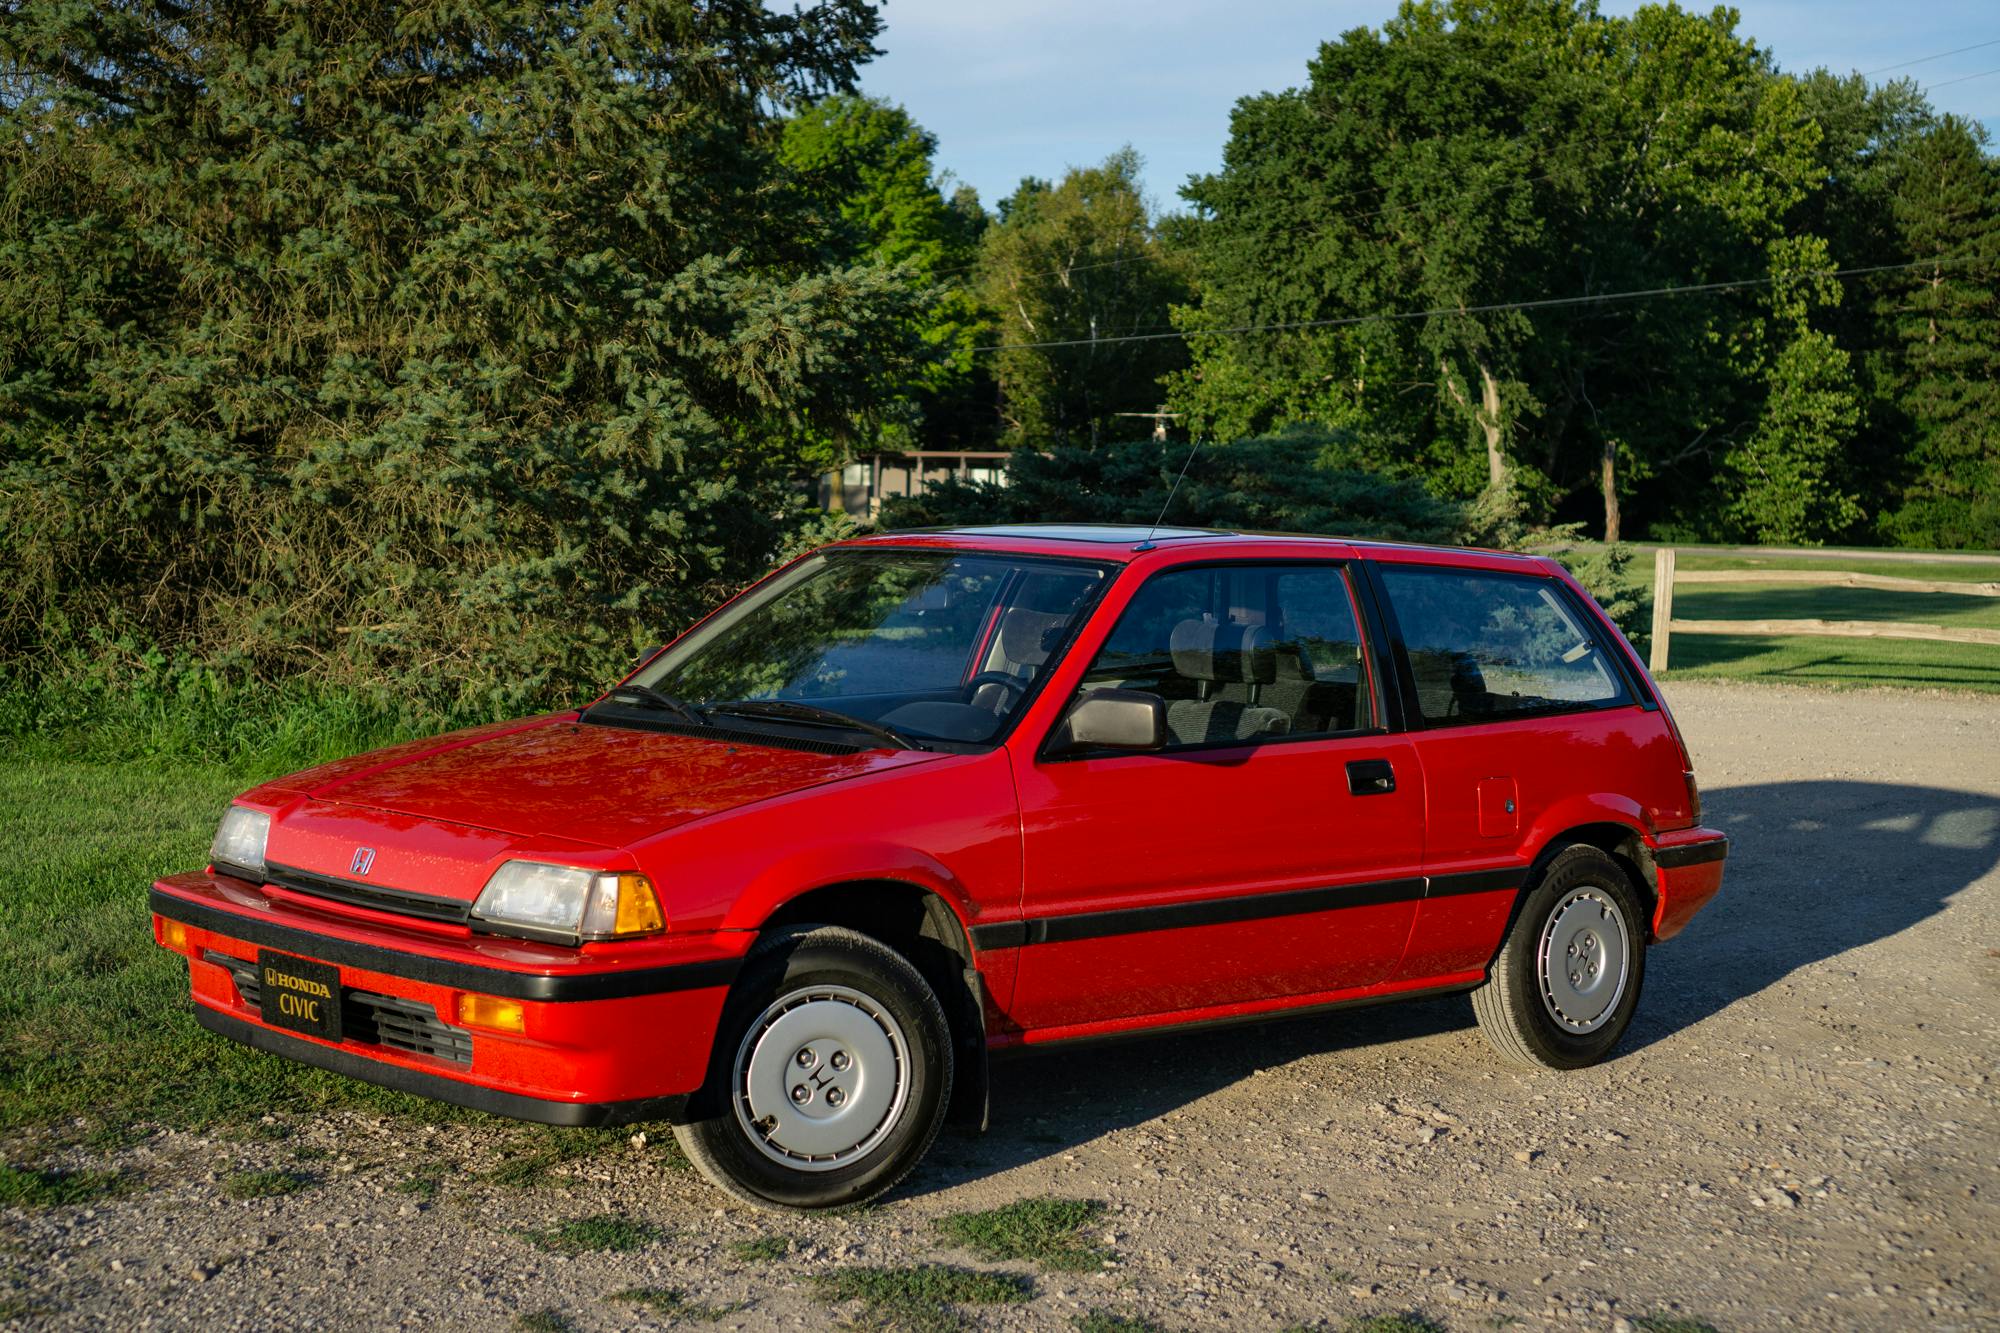 1986 Honda Civic Si: If only, if only - Hagerty Media